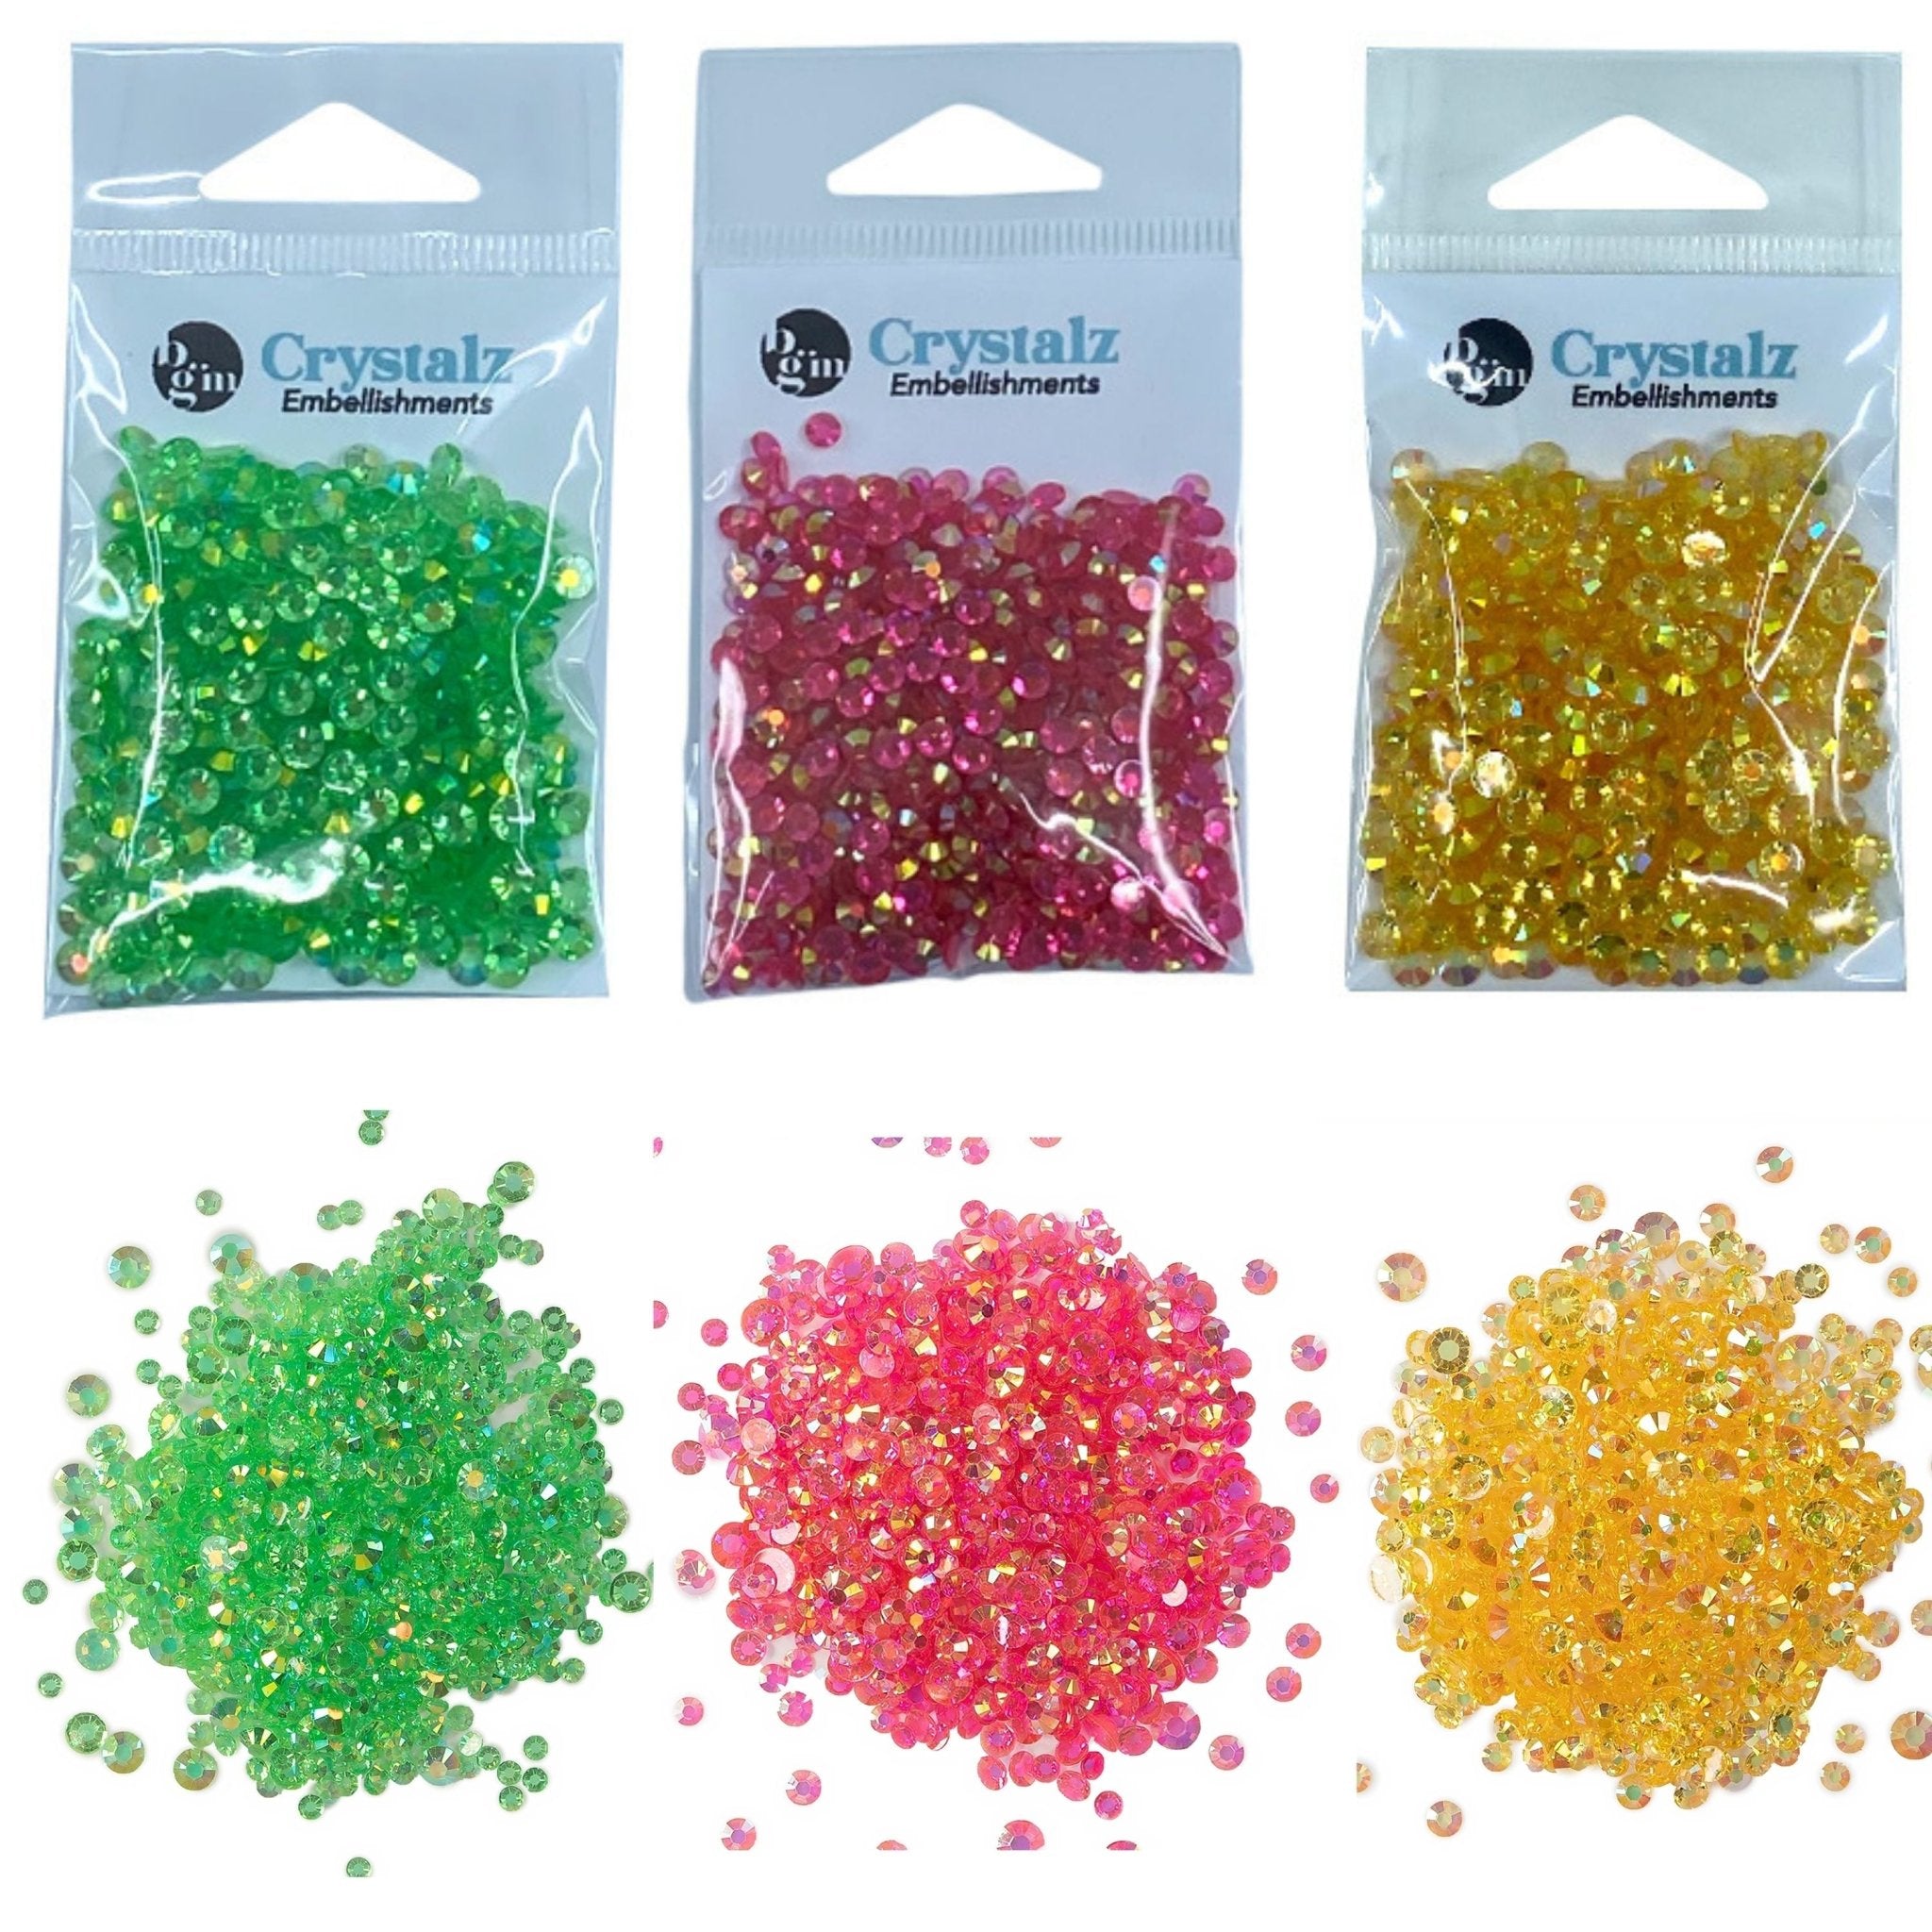 Buttons Galore Crystalz Iridescent Flat Back Gems for DIY Crafts, Scrapbooks, Paper Crafts - Floral Colors 1200 Pieces - Buttons Galore and More